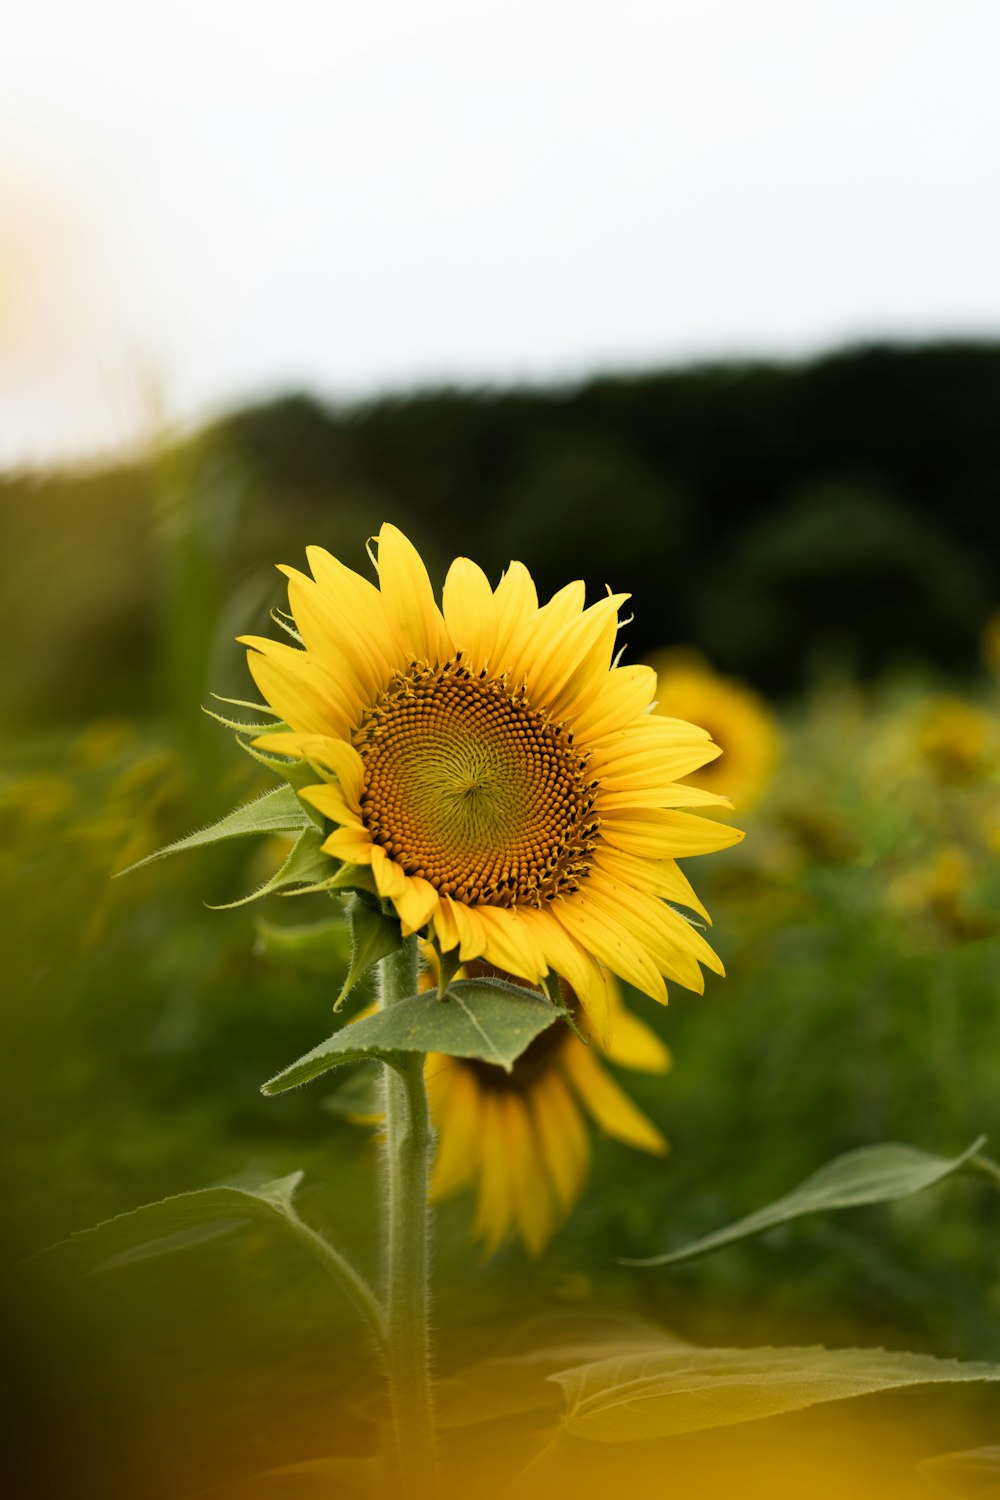 a sunflower in a field of sunflowers